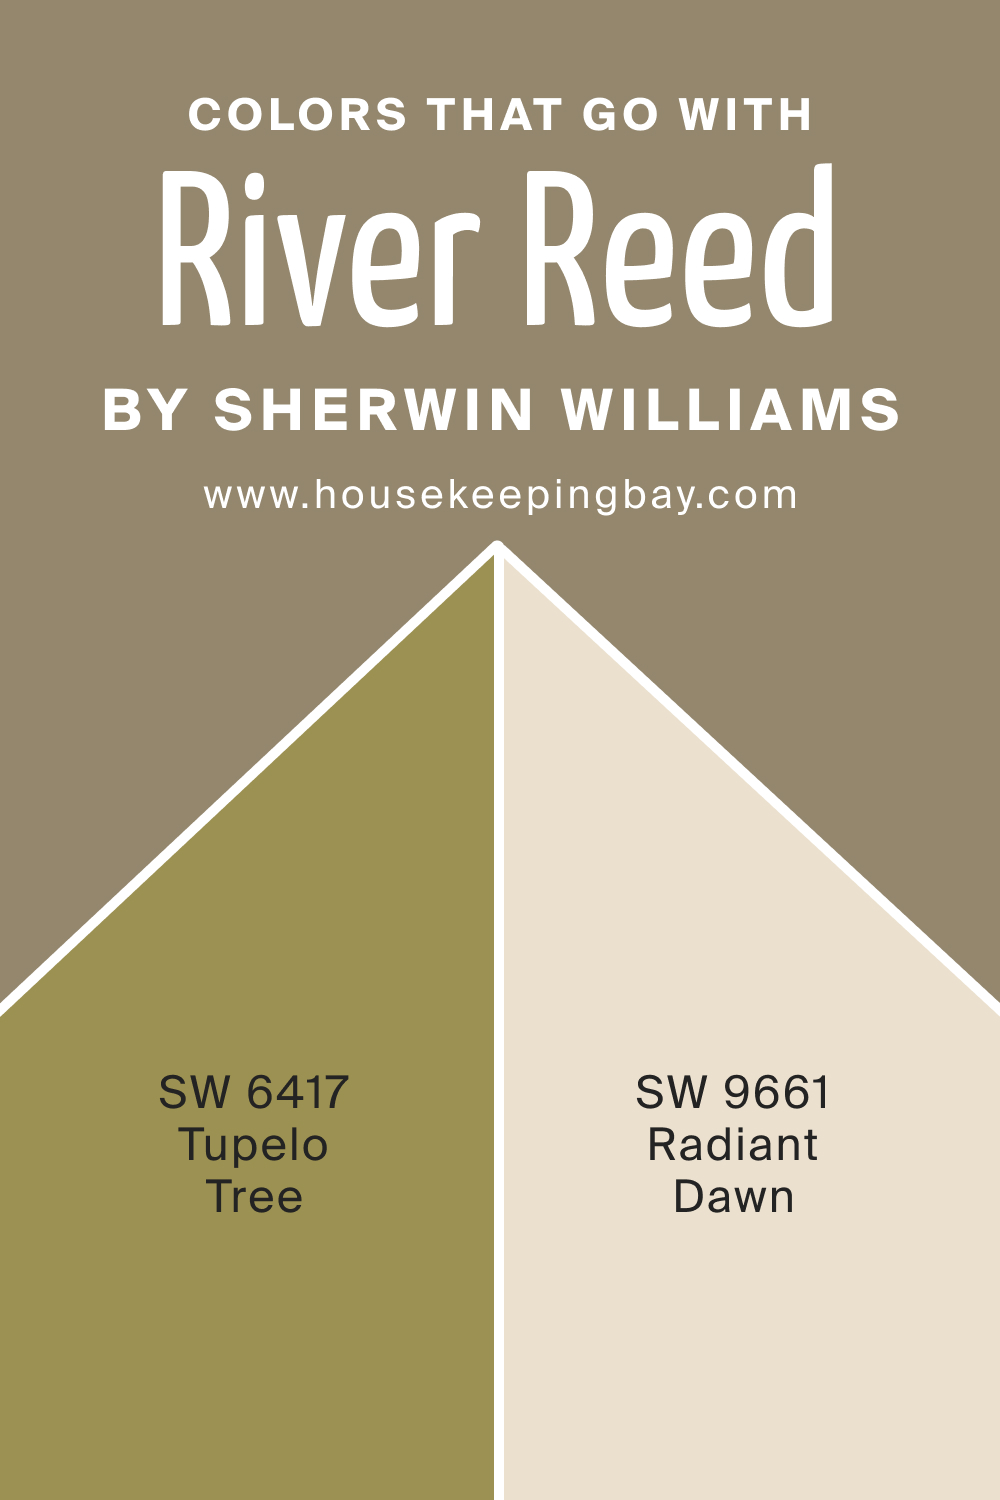 Colors that goes with SW 9534 River Reed by Sherwin Williams